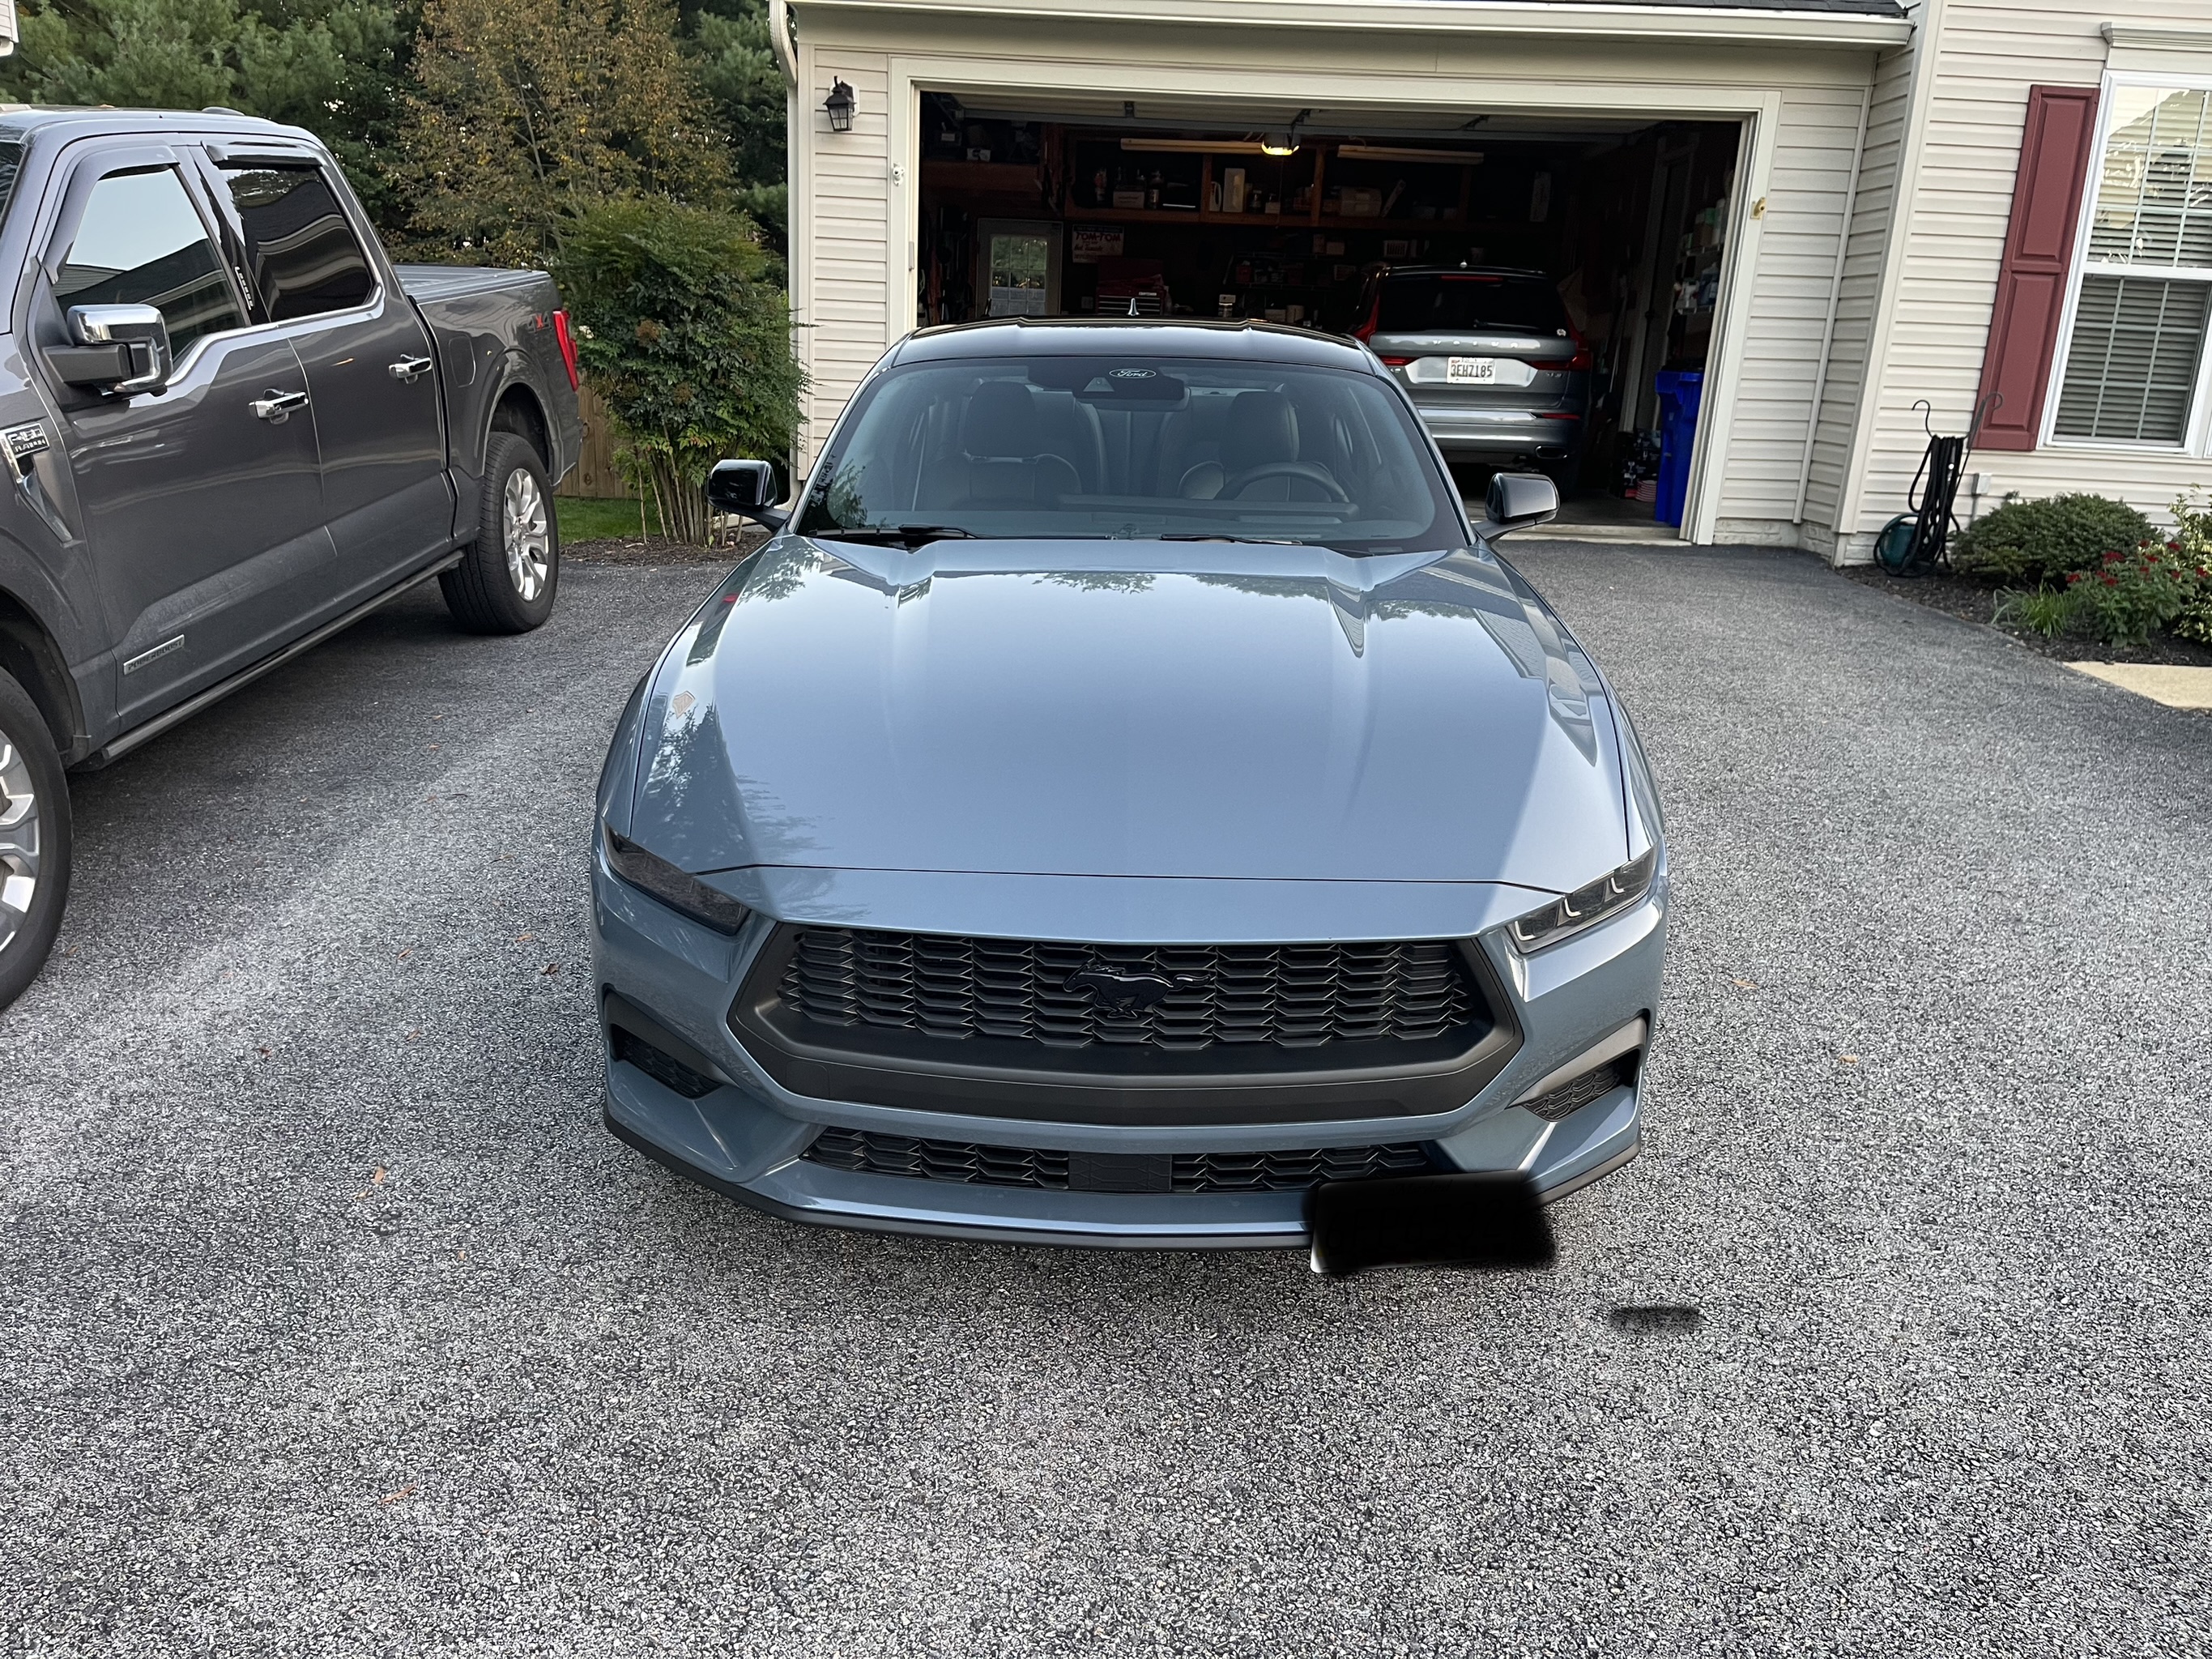 S650 Mustang BUILT & SHIPPED !! Tracker update 2023: What's your status? IMG_0575